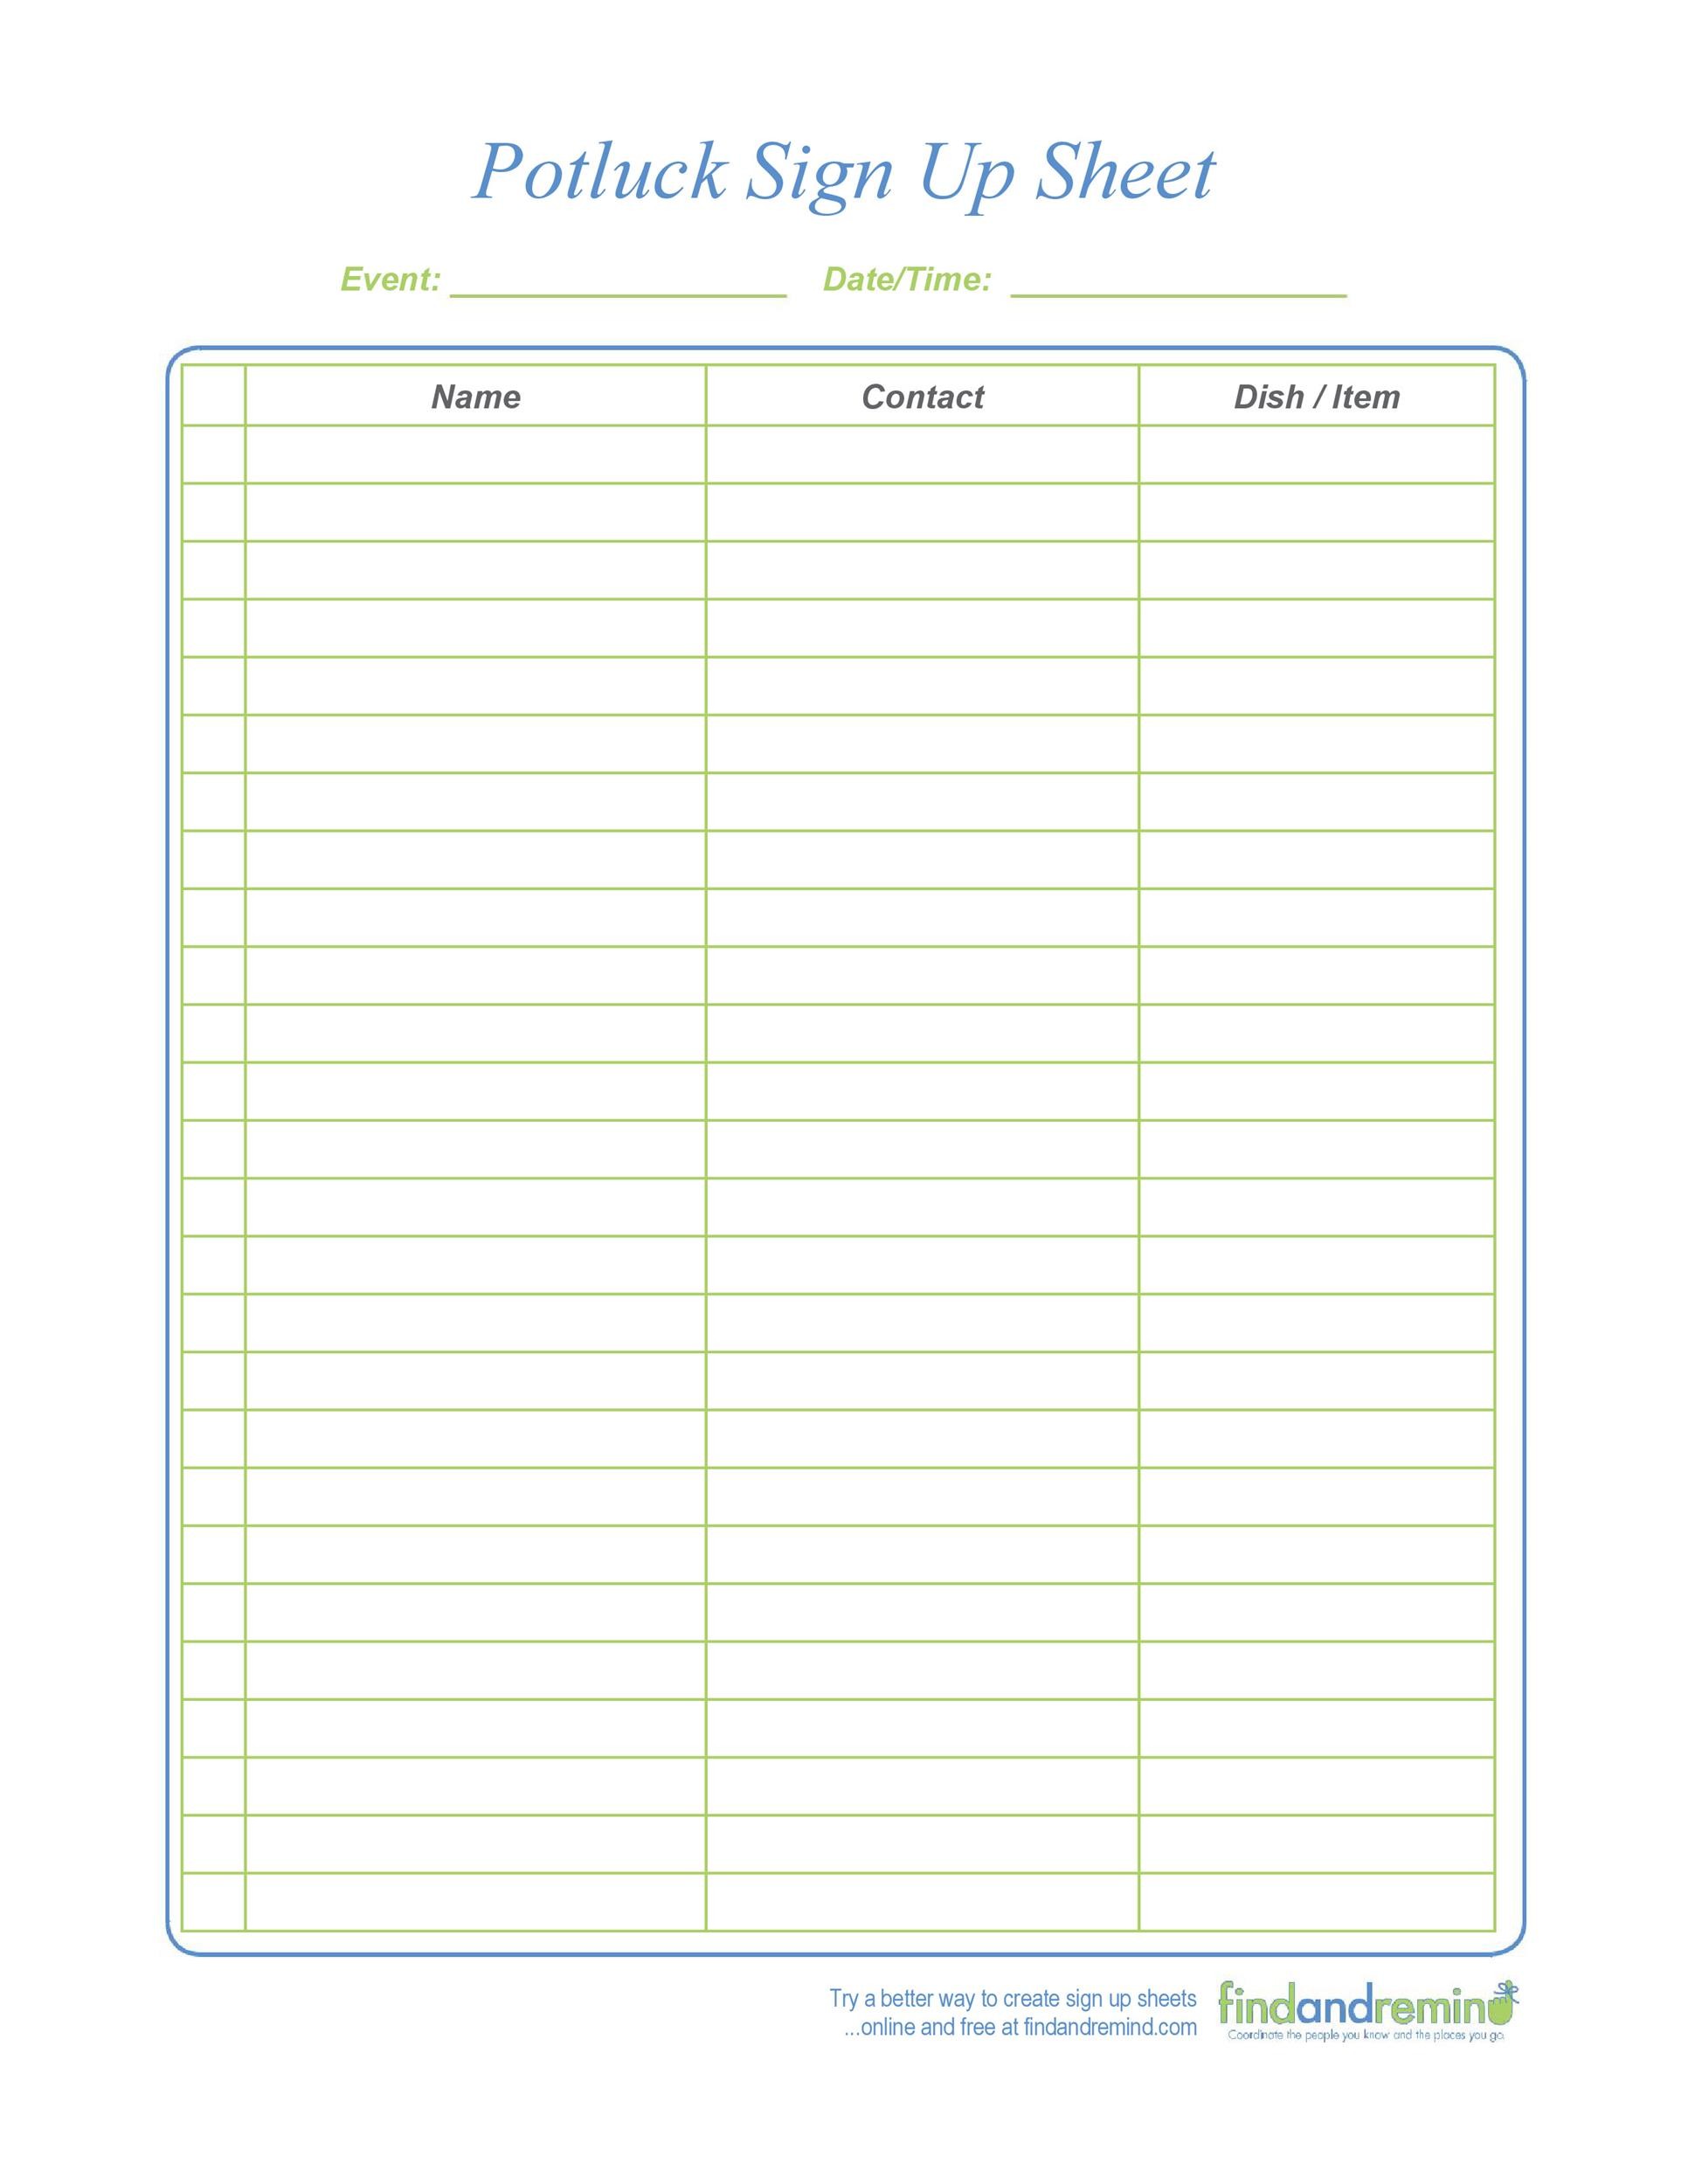 38 Best Potluck Sign up Sheets (For Any Occasion) ᐅ TemplateLab